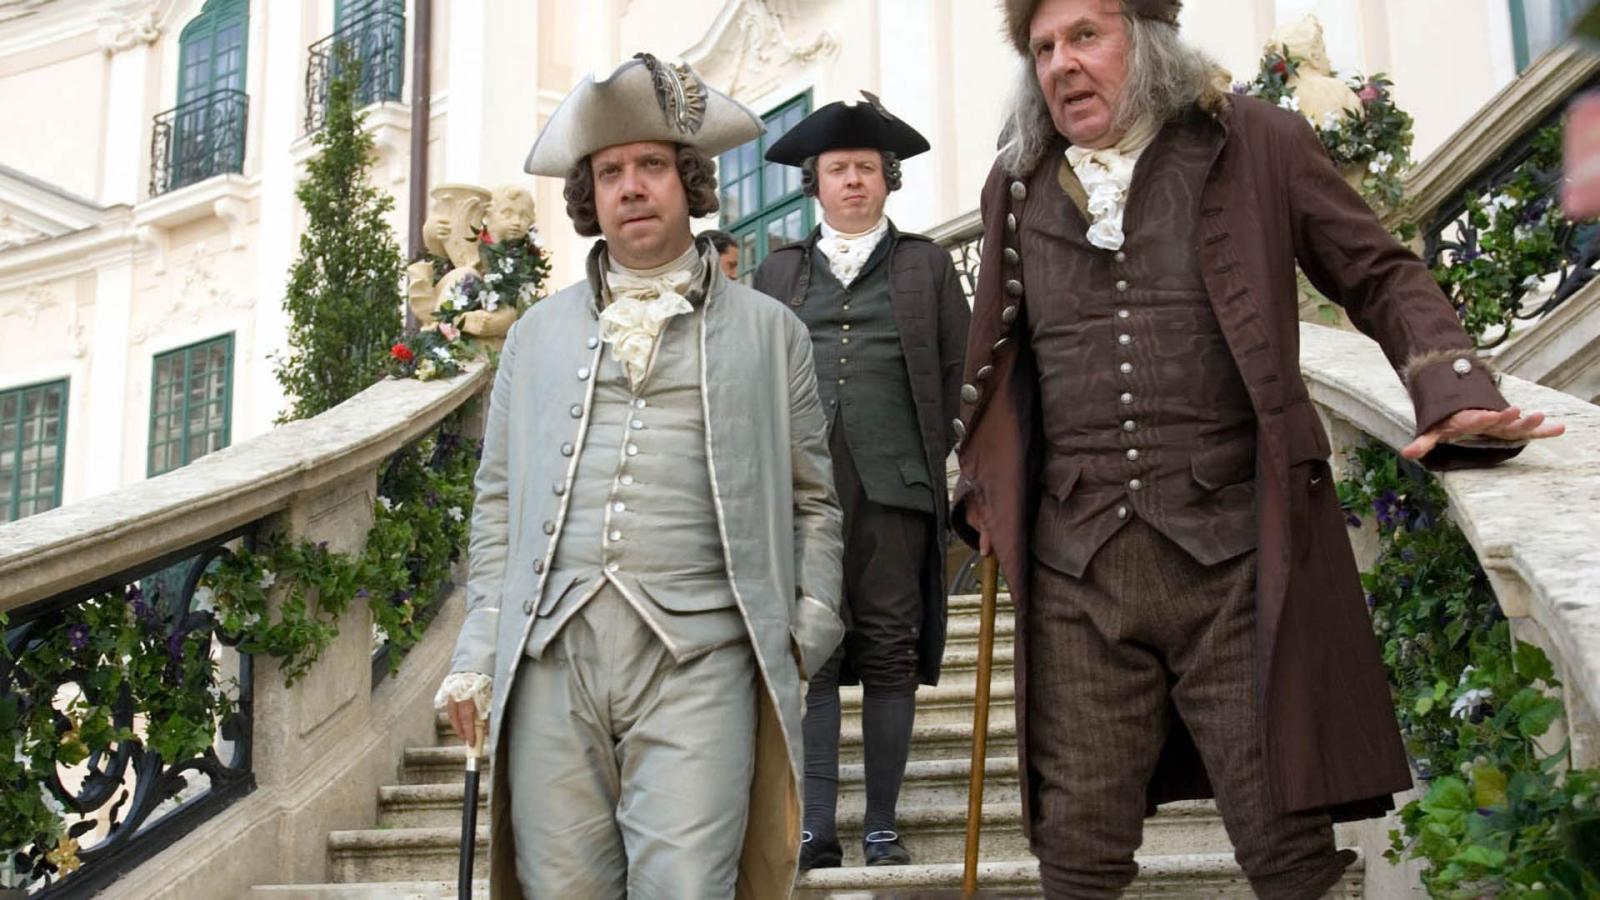 5 TV Shows About America's Colonial Era That Got Their History Right - image 5